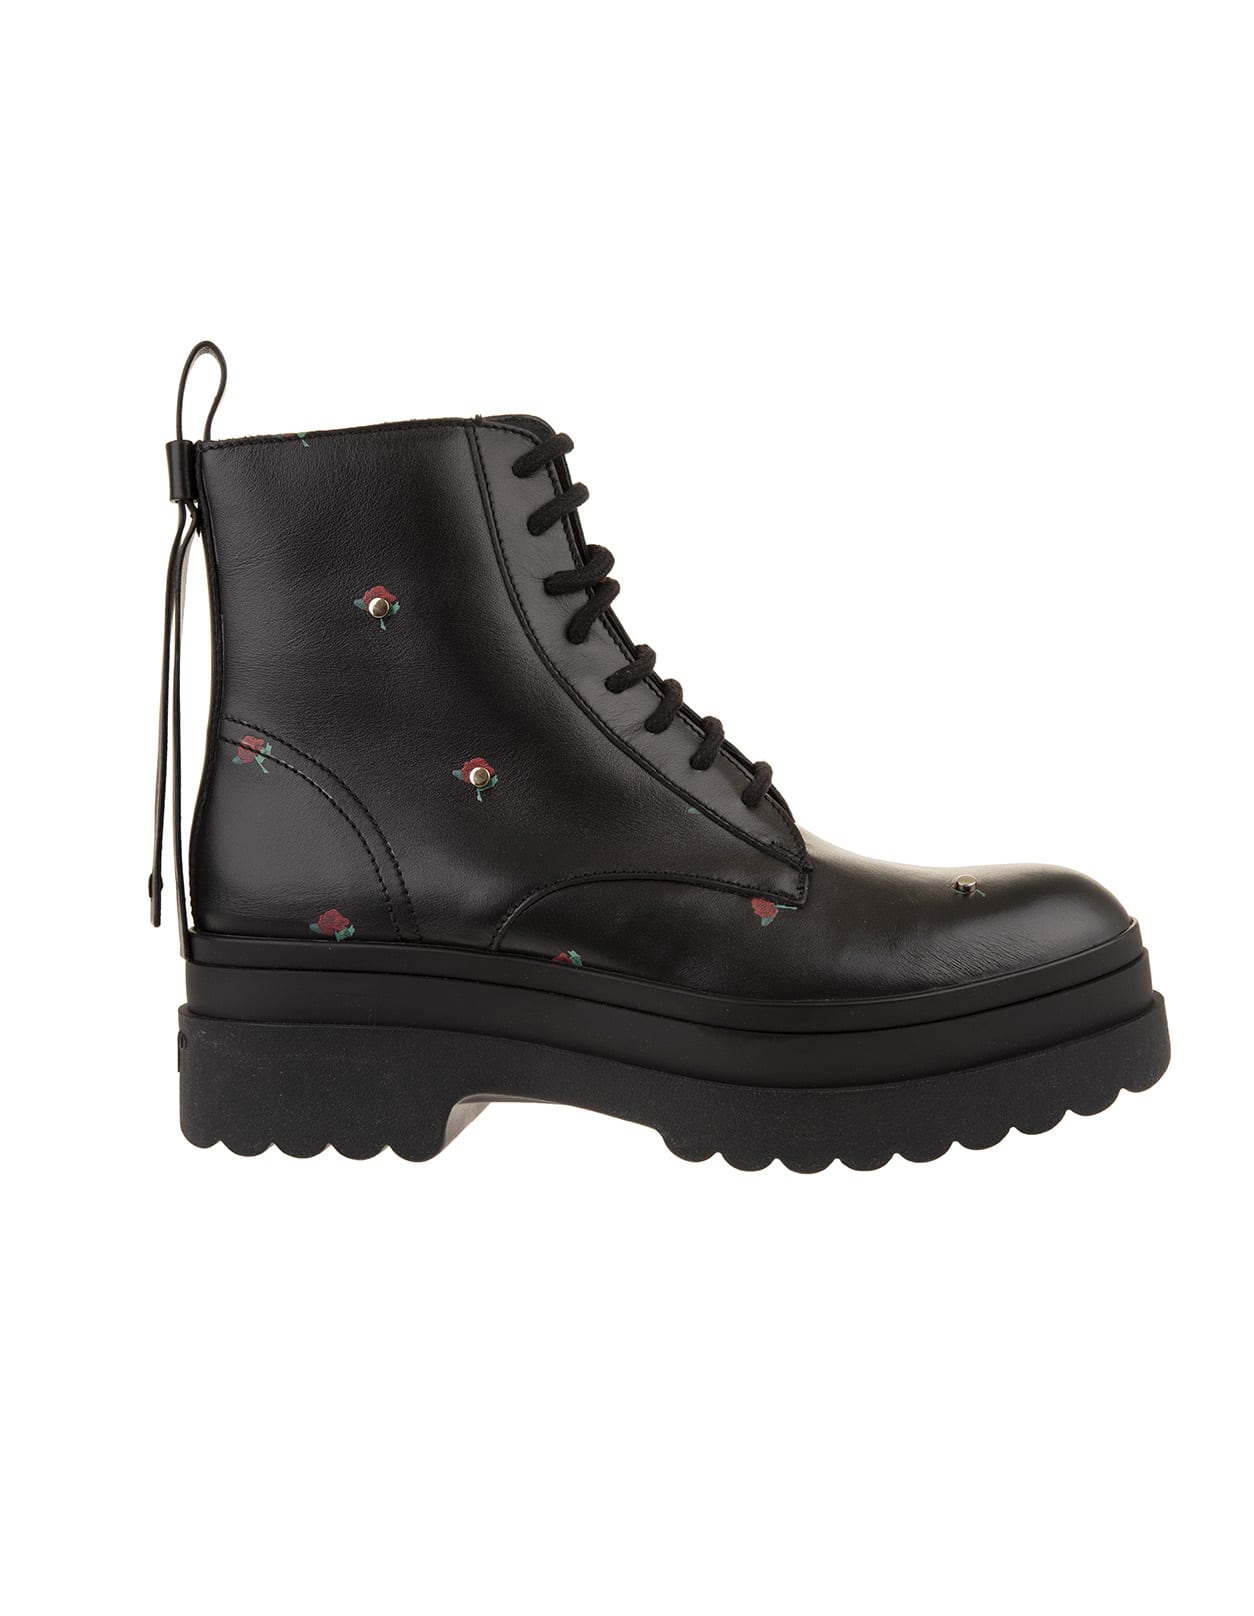 RED Valentino Black Ankle Boot With Roses Print And Studs